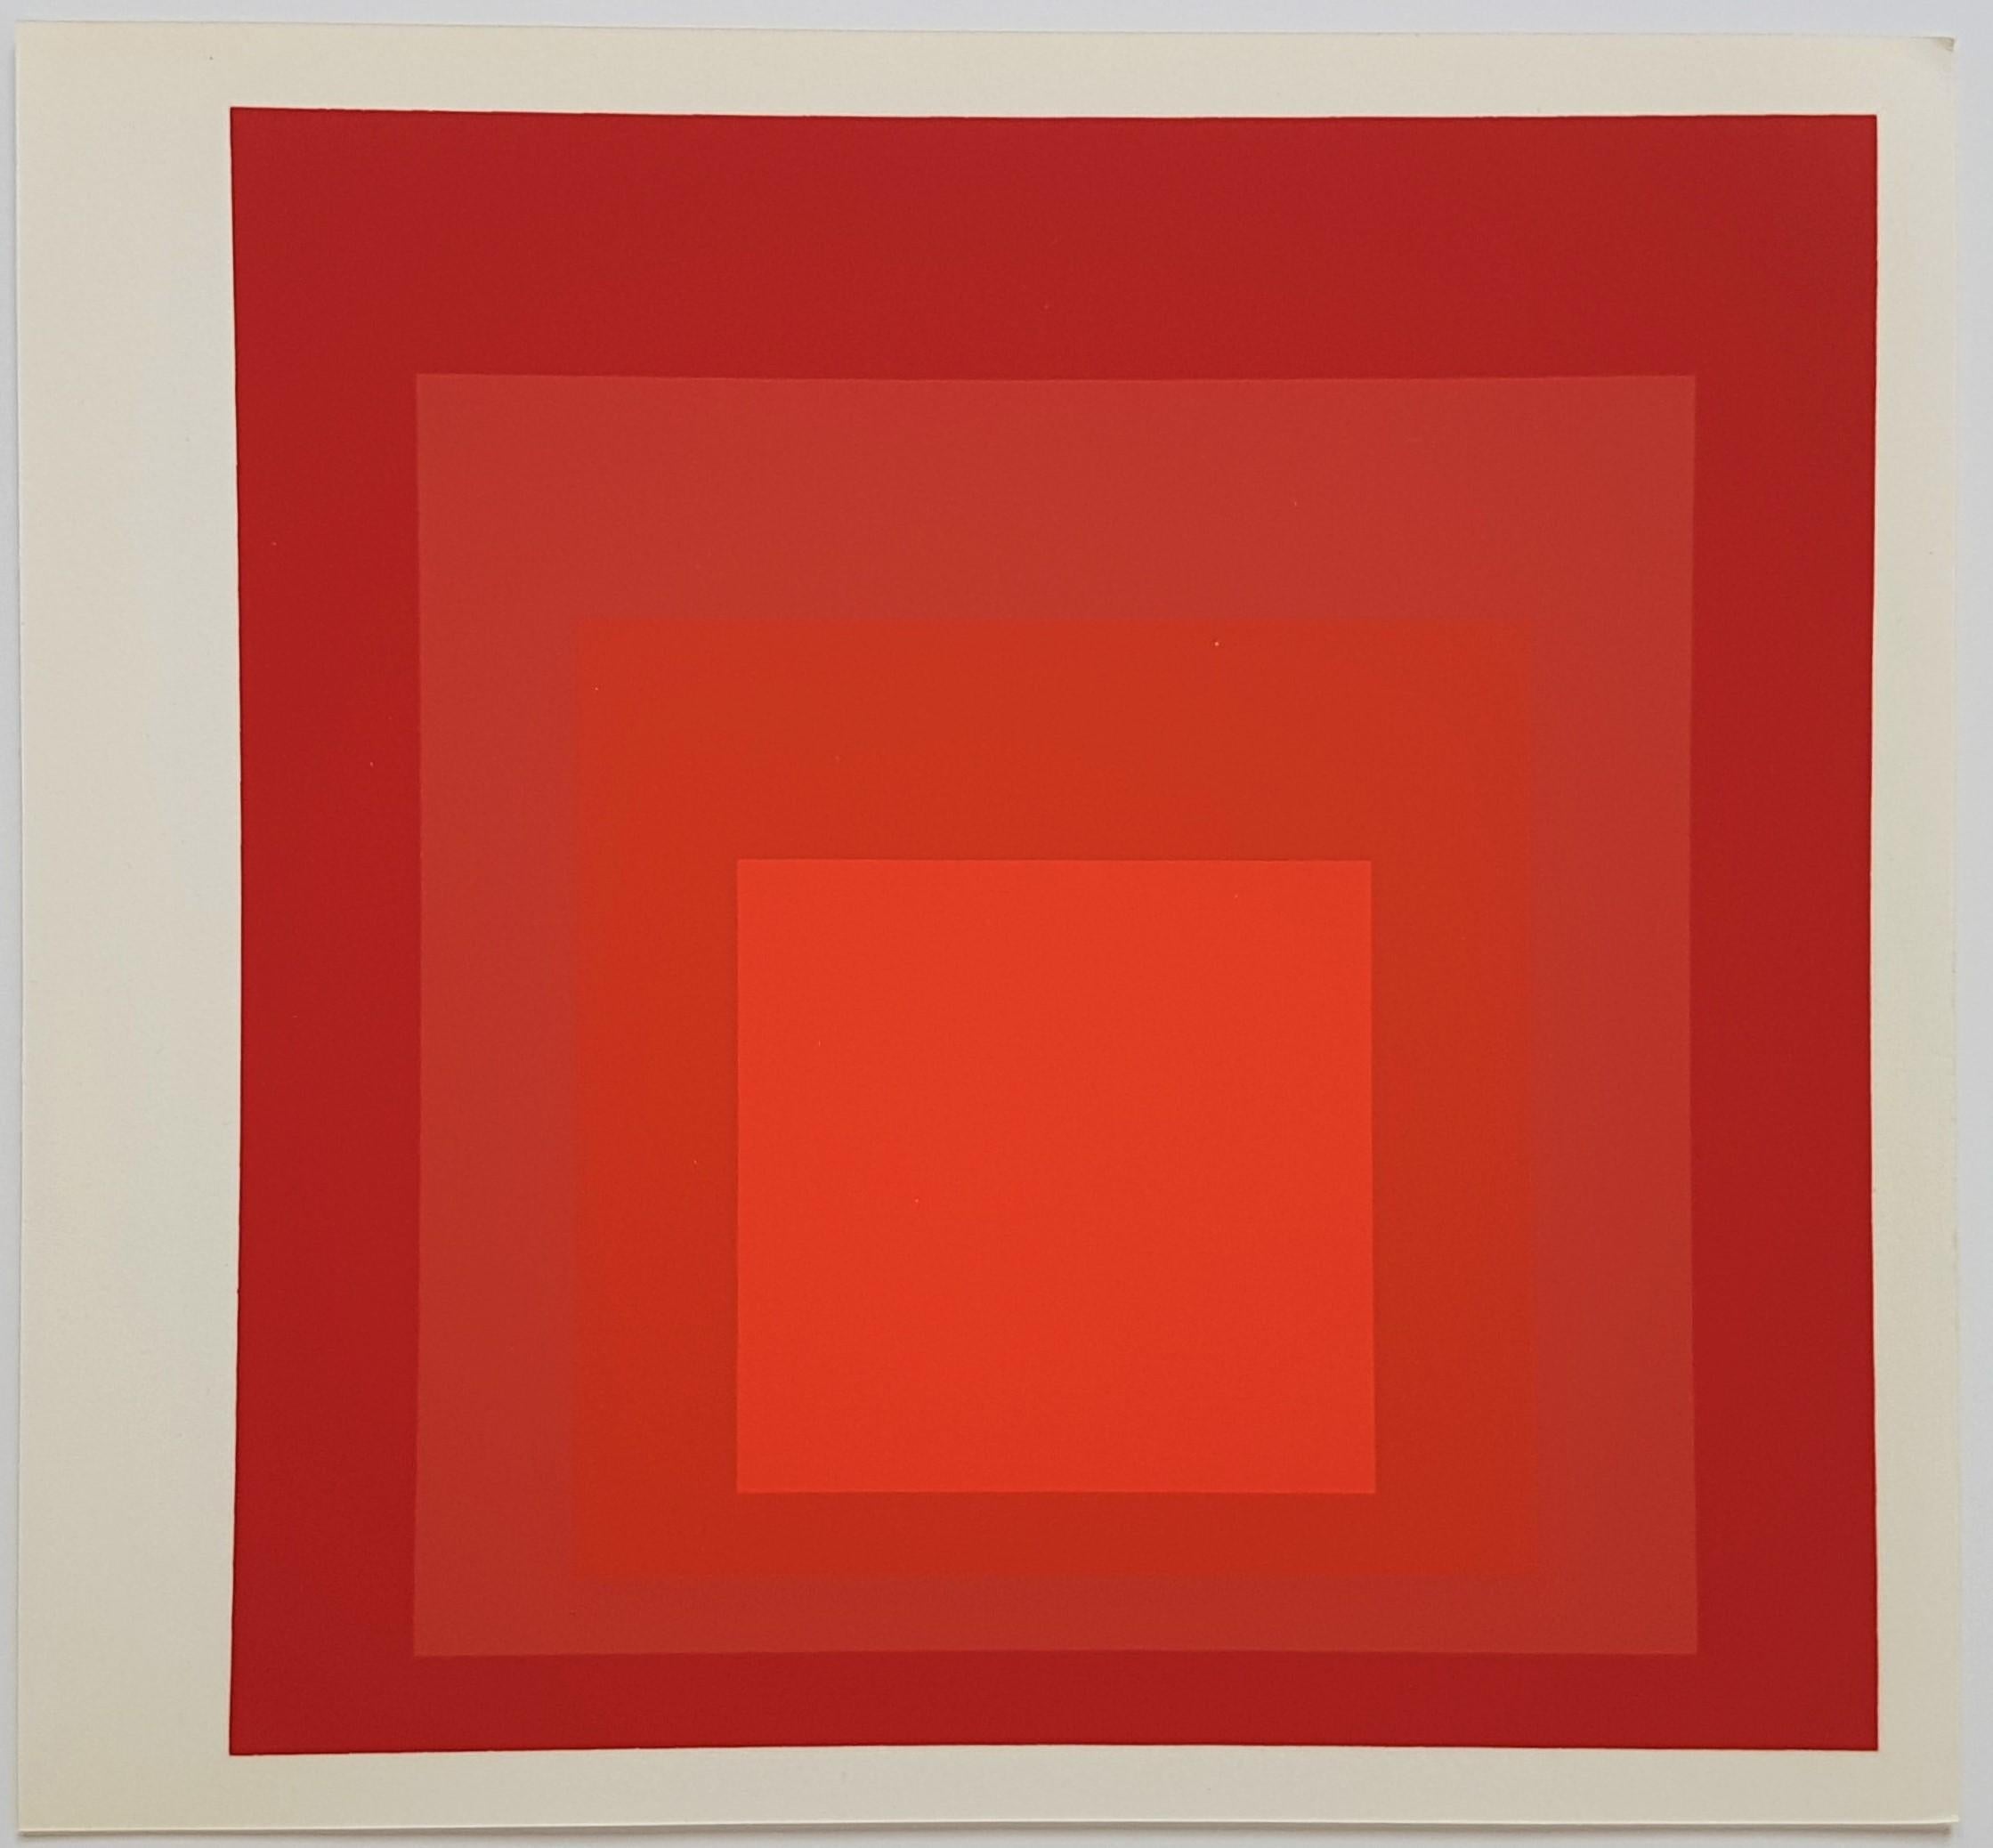 Homage to the Square: R-III A-4 (~28% OFF LIST PRICE - LIMITED TIME ONLY) - Print by (after) Josef Albers